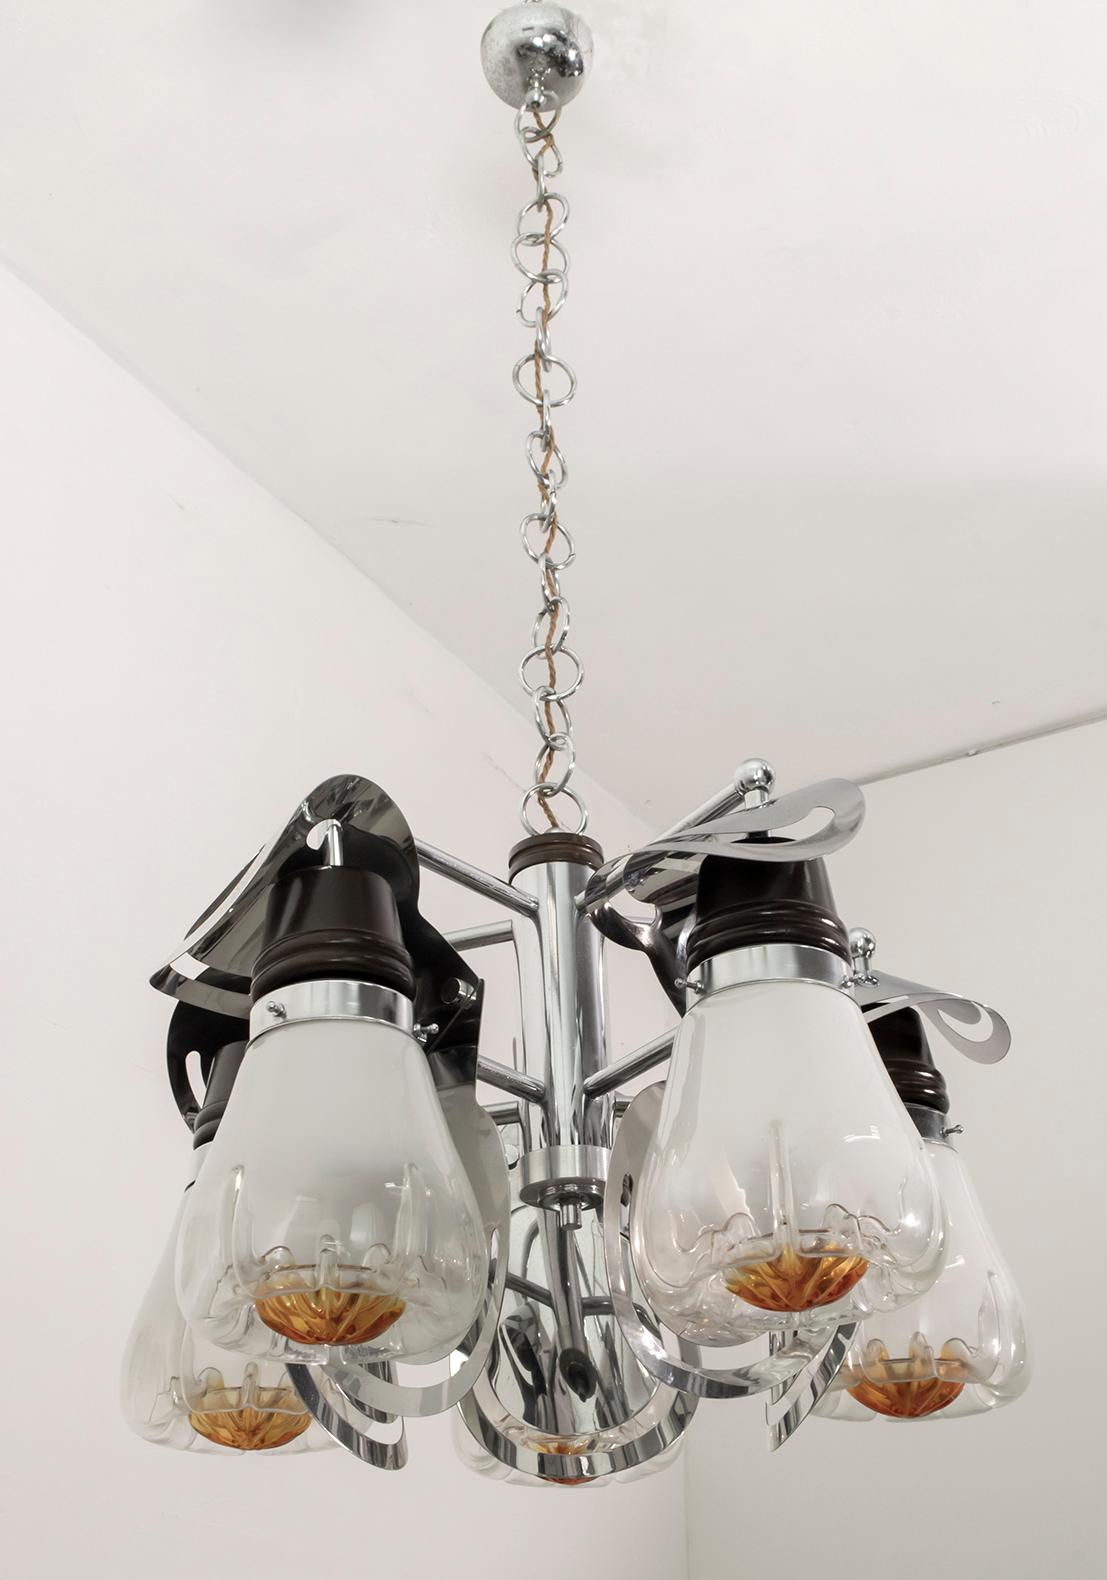 This chandelier is composed of 5 blown glass bowls, the sculptural structure is in steel and wood.

The historic Mazzega IVR glassworks was the architect, starting in the mid-1950s, of a profound artistic and conceptual renewal in the field of